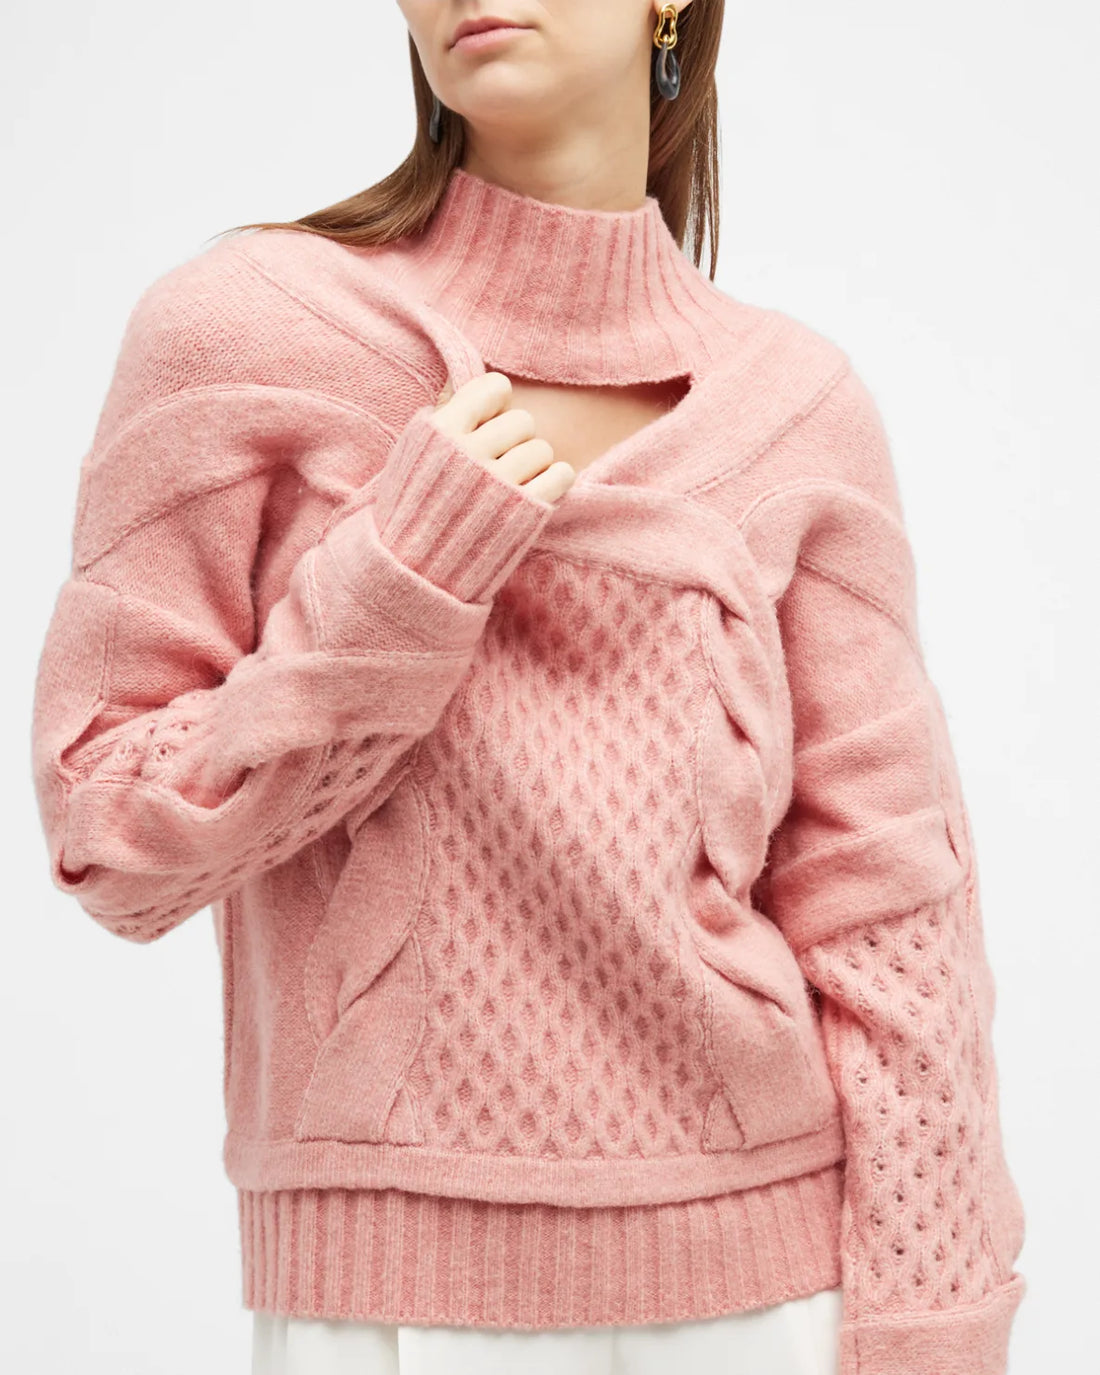 Naadam: Specializes in luxury knitwear made from high-quality, sustainable materials - Viva O Sol